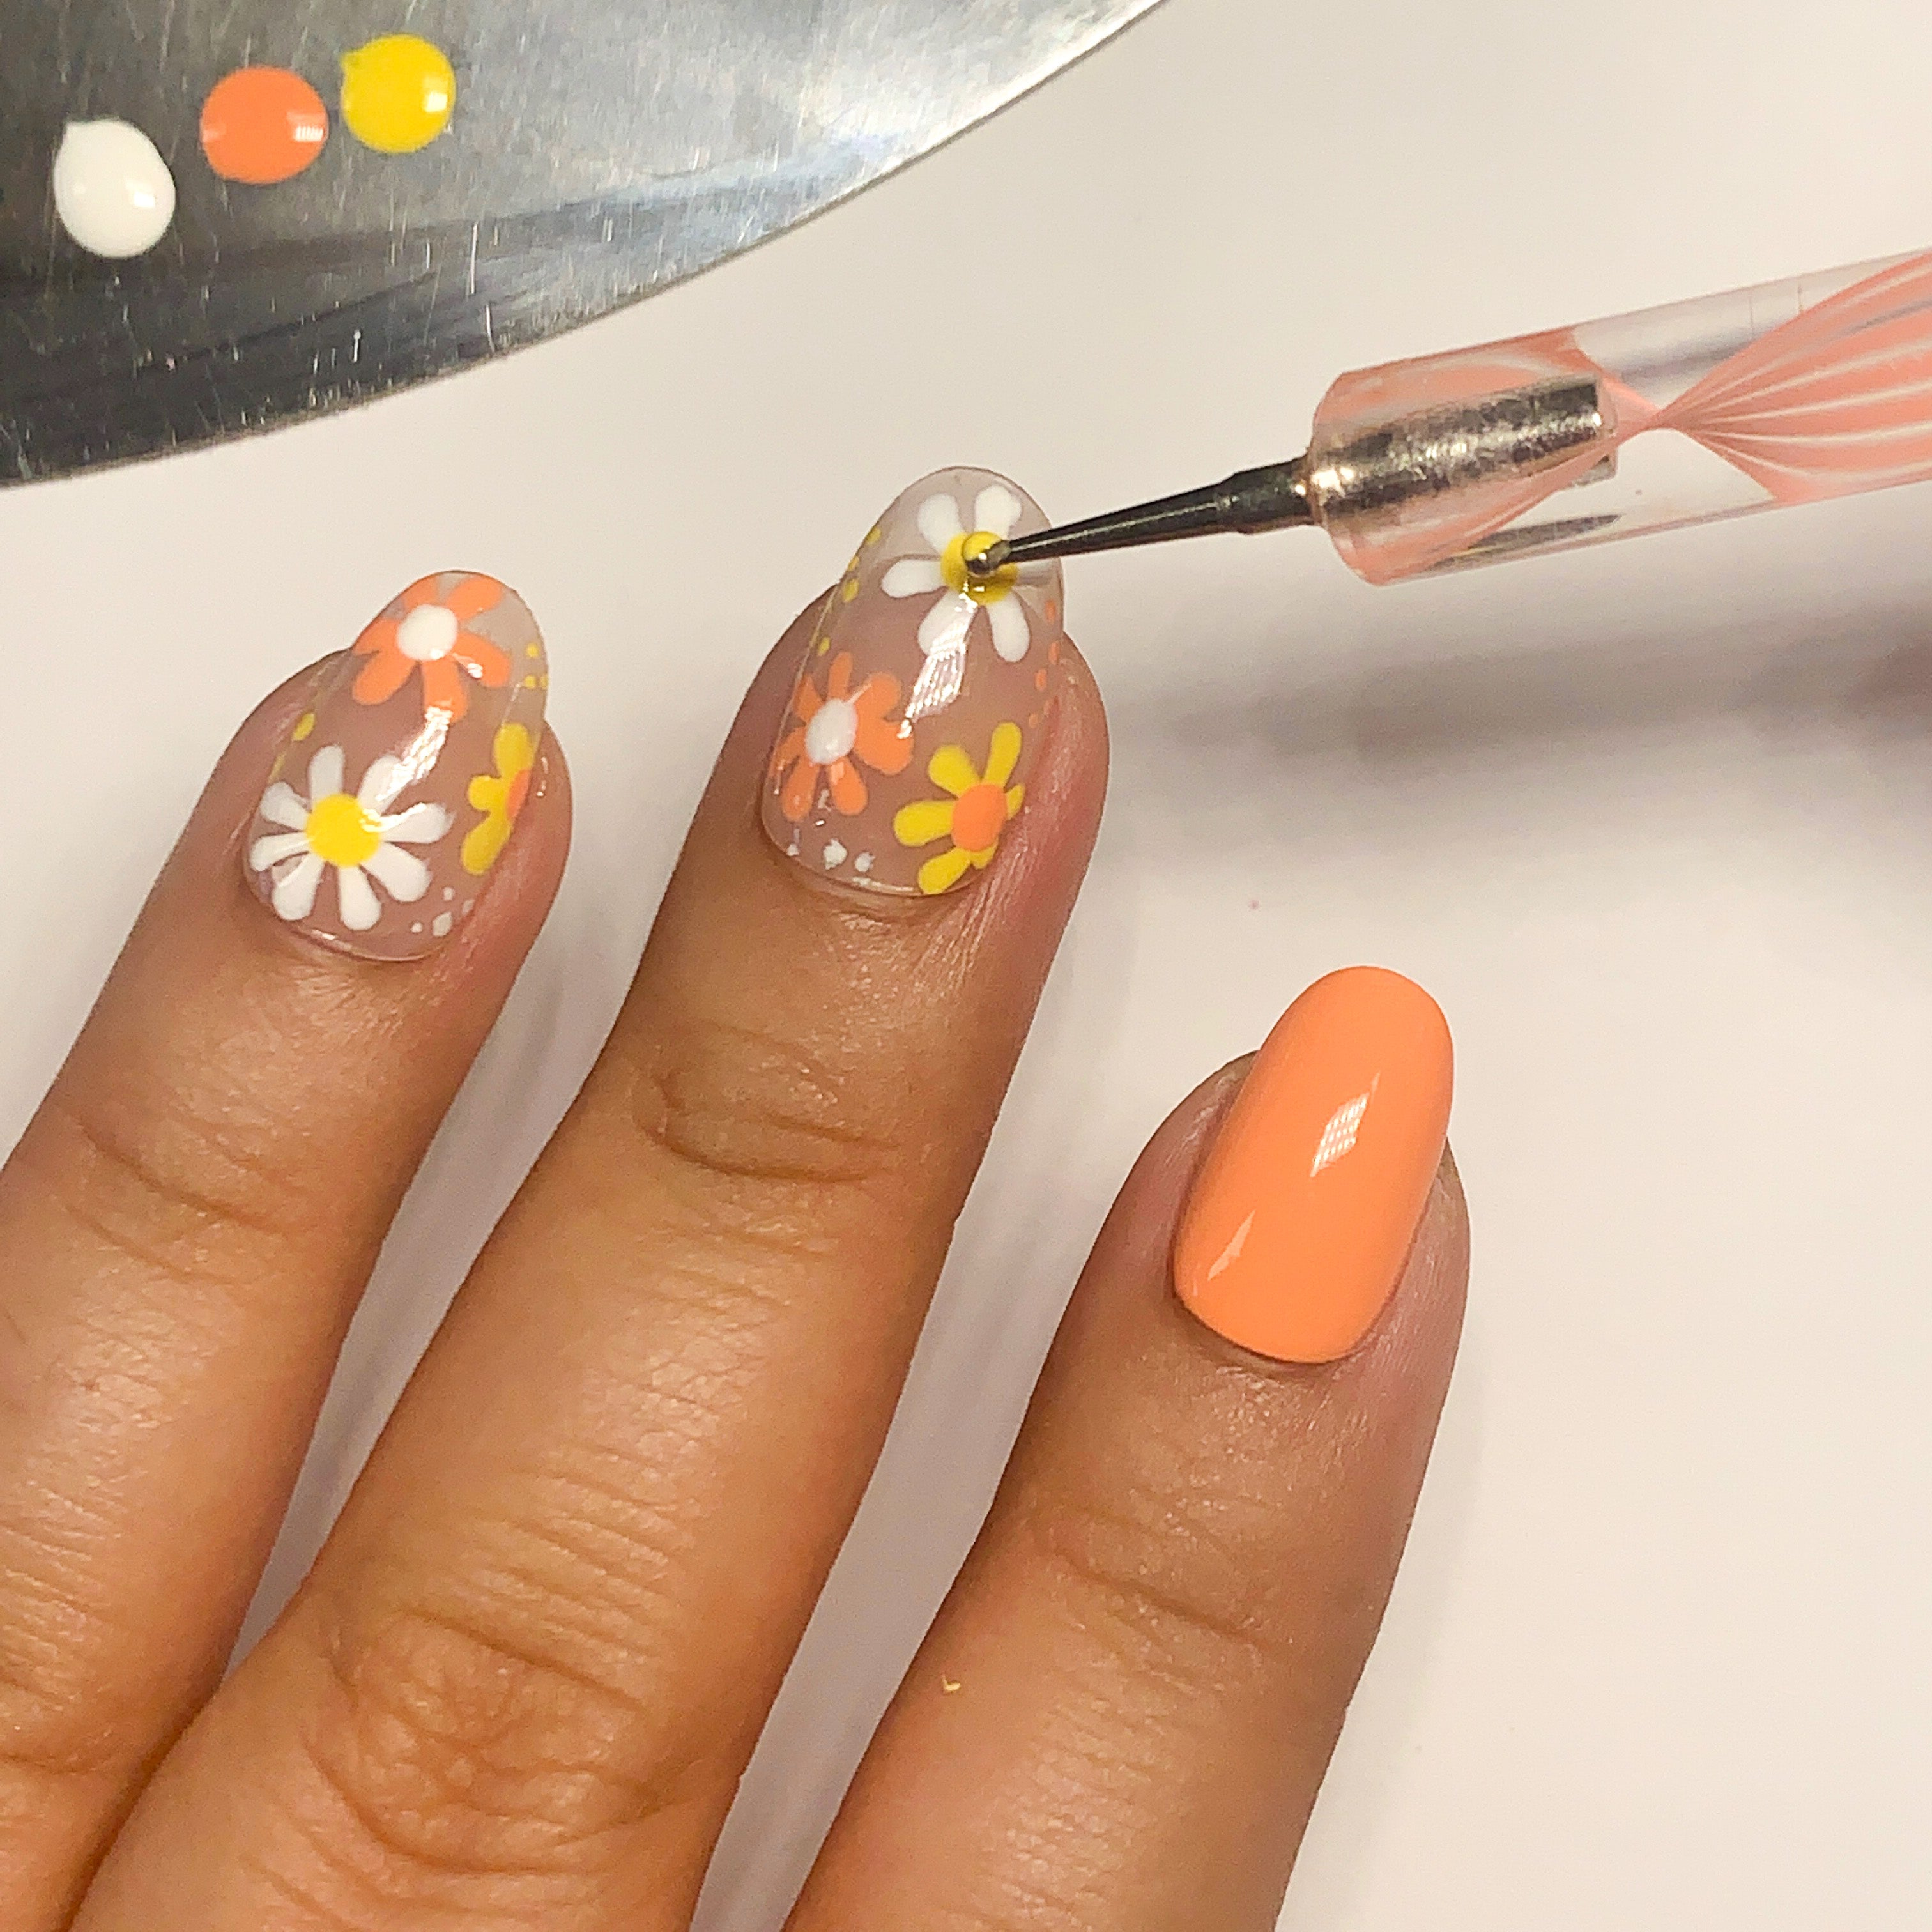 Can you make more complicated nail designs with regular nail polish? Or do  you have to use gel polish? Here are several of designs I like- I've only  ever done regular polish/solid